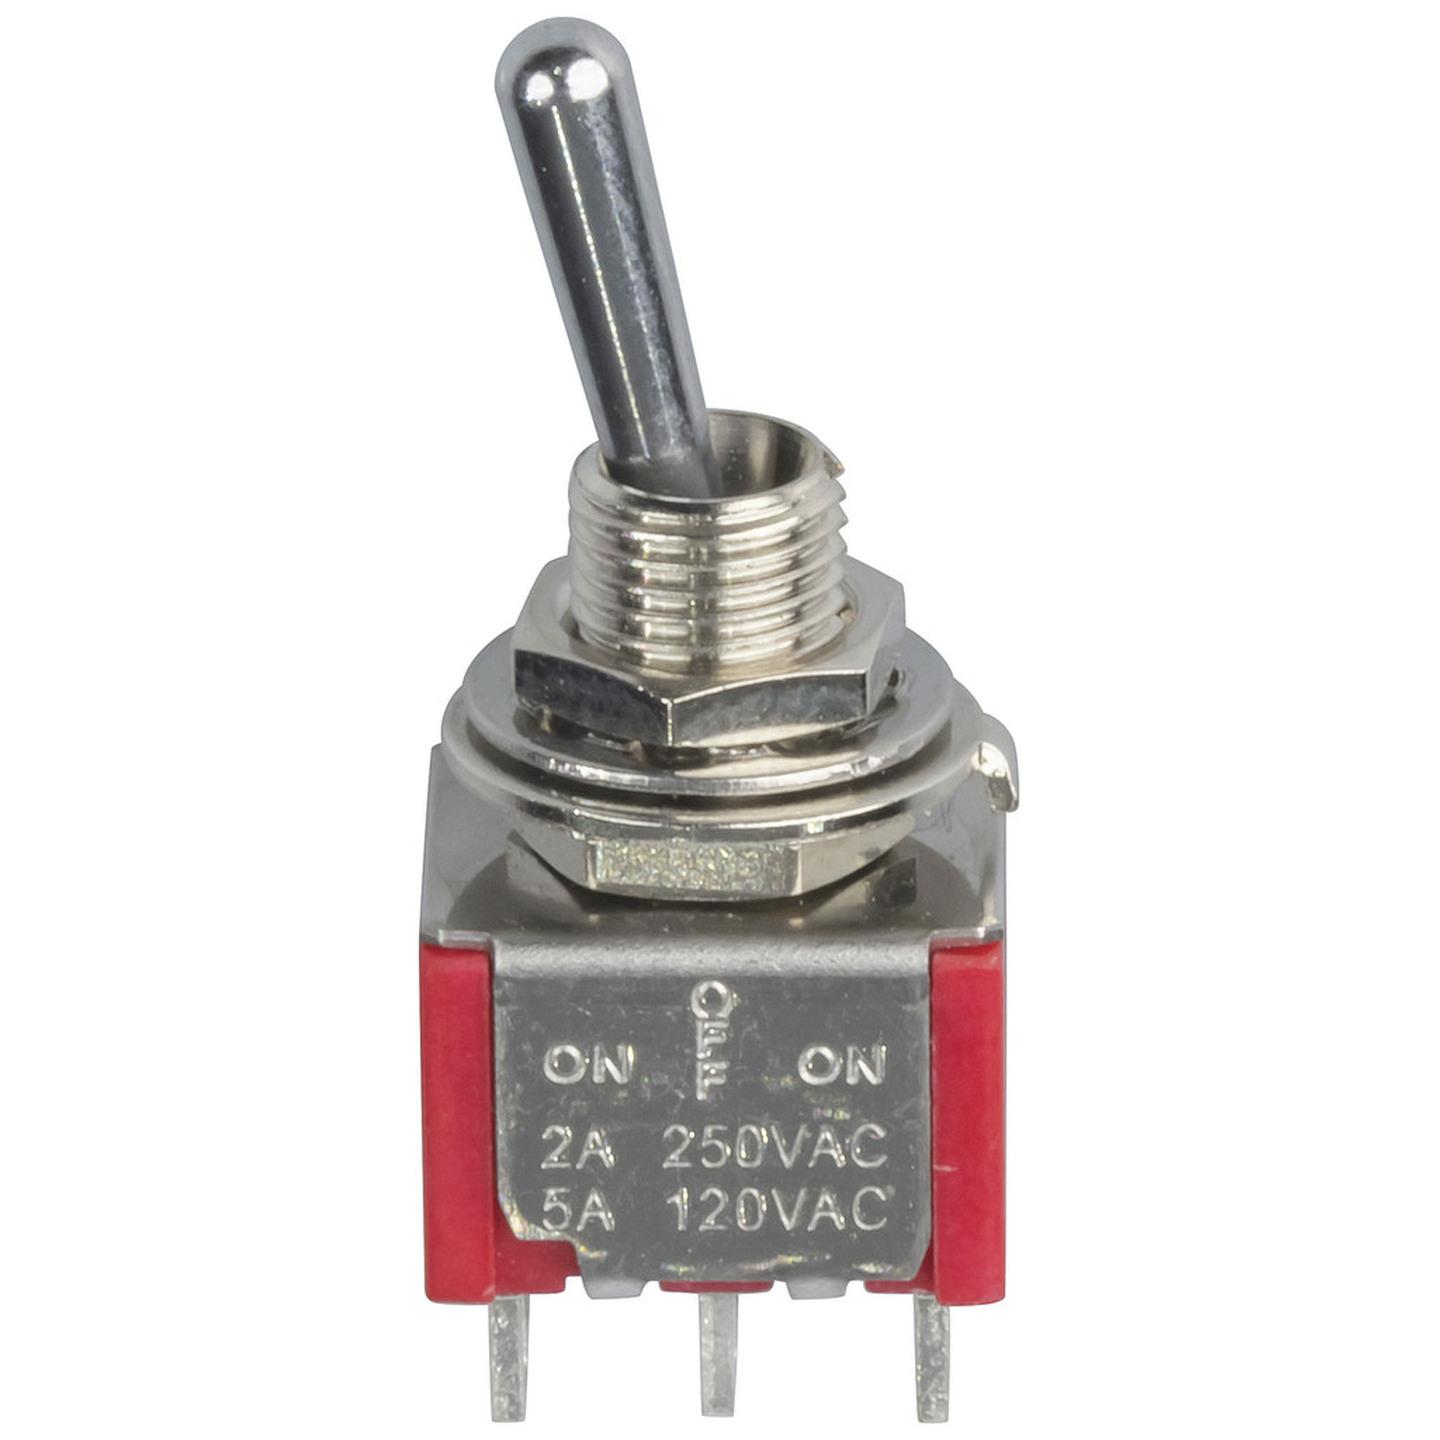 DPDT Miniature Toggle Switch - Solder Tag Centre Offon - off - on